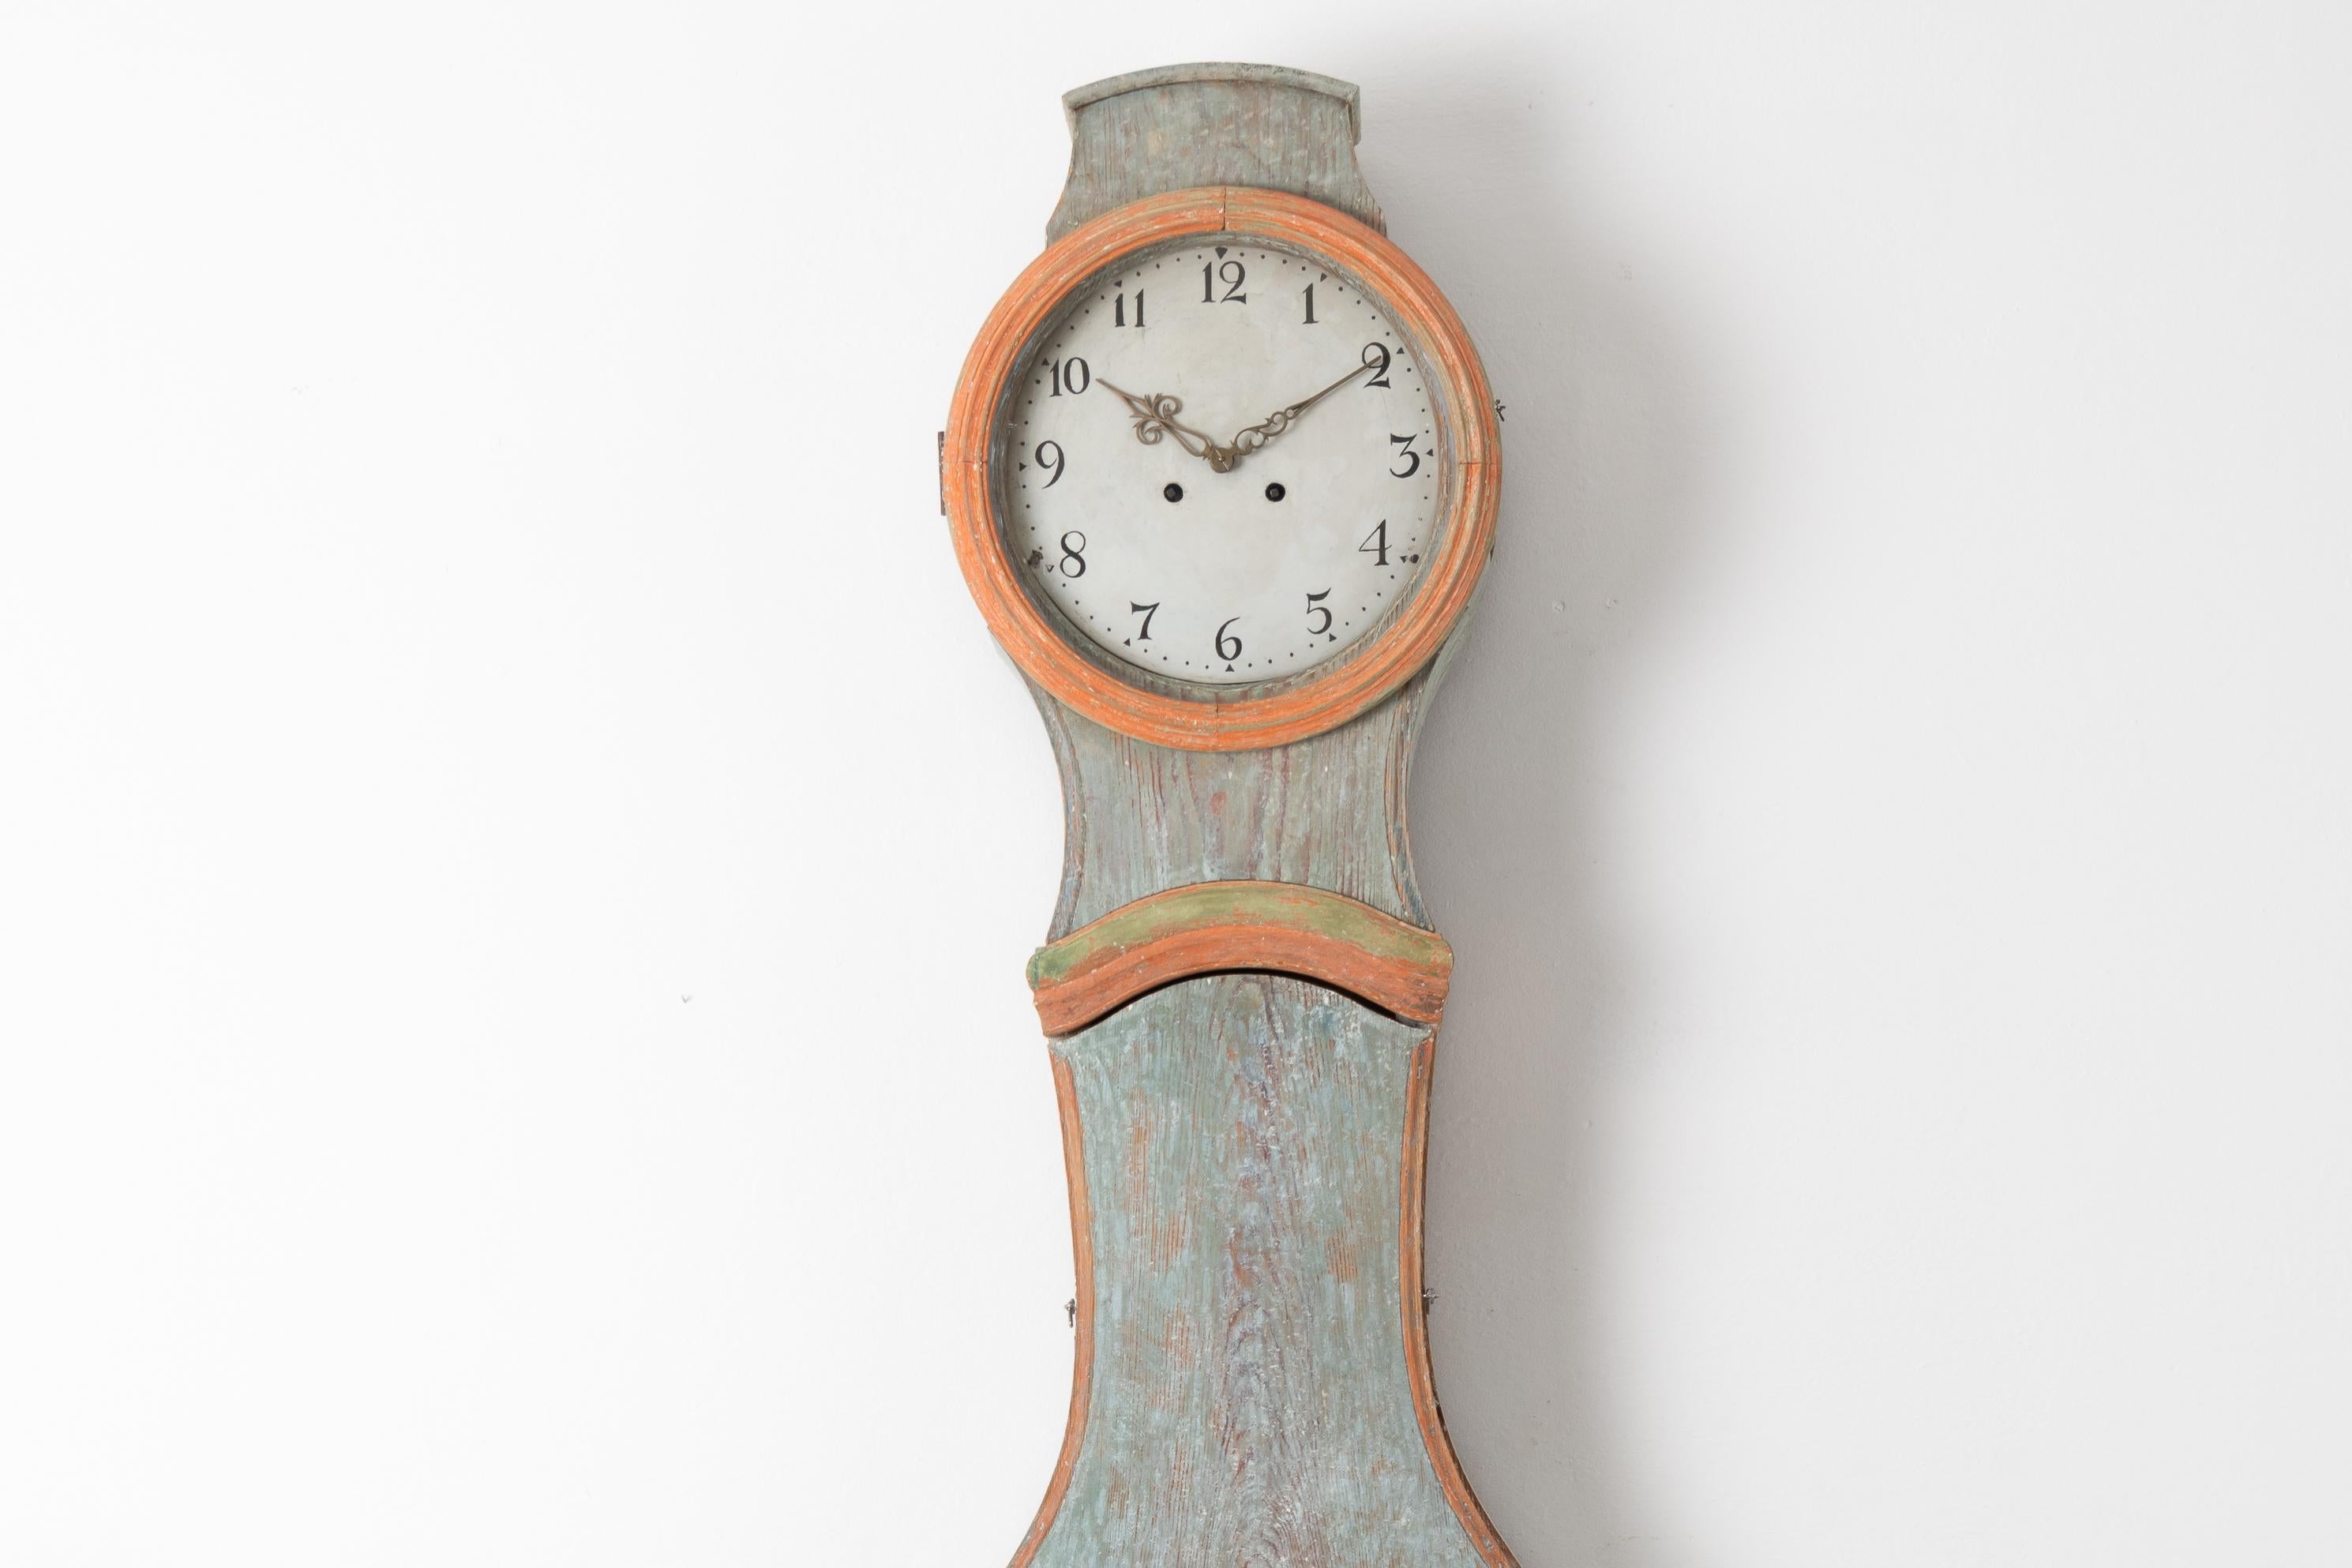 Northern Swedish classic Rococo long case clock from the first half of the 19th century, circa 1820-1830. The clock has a good size and the classic rococo shape. Made in painted pine with dry scraped original paint. The original paint is a charming